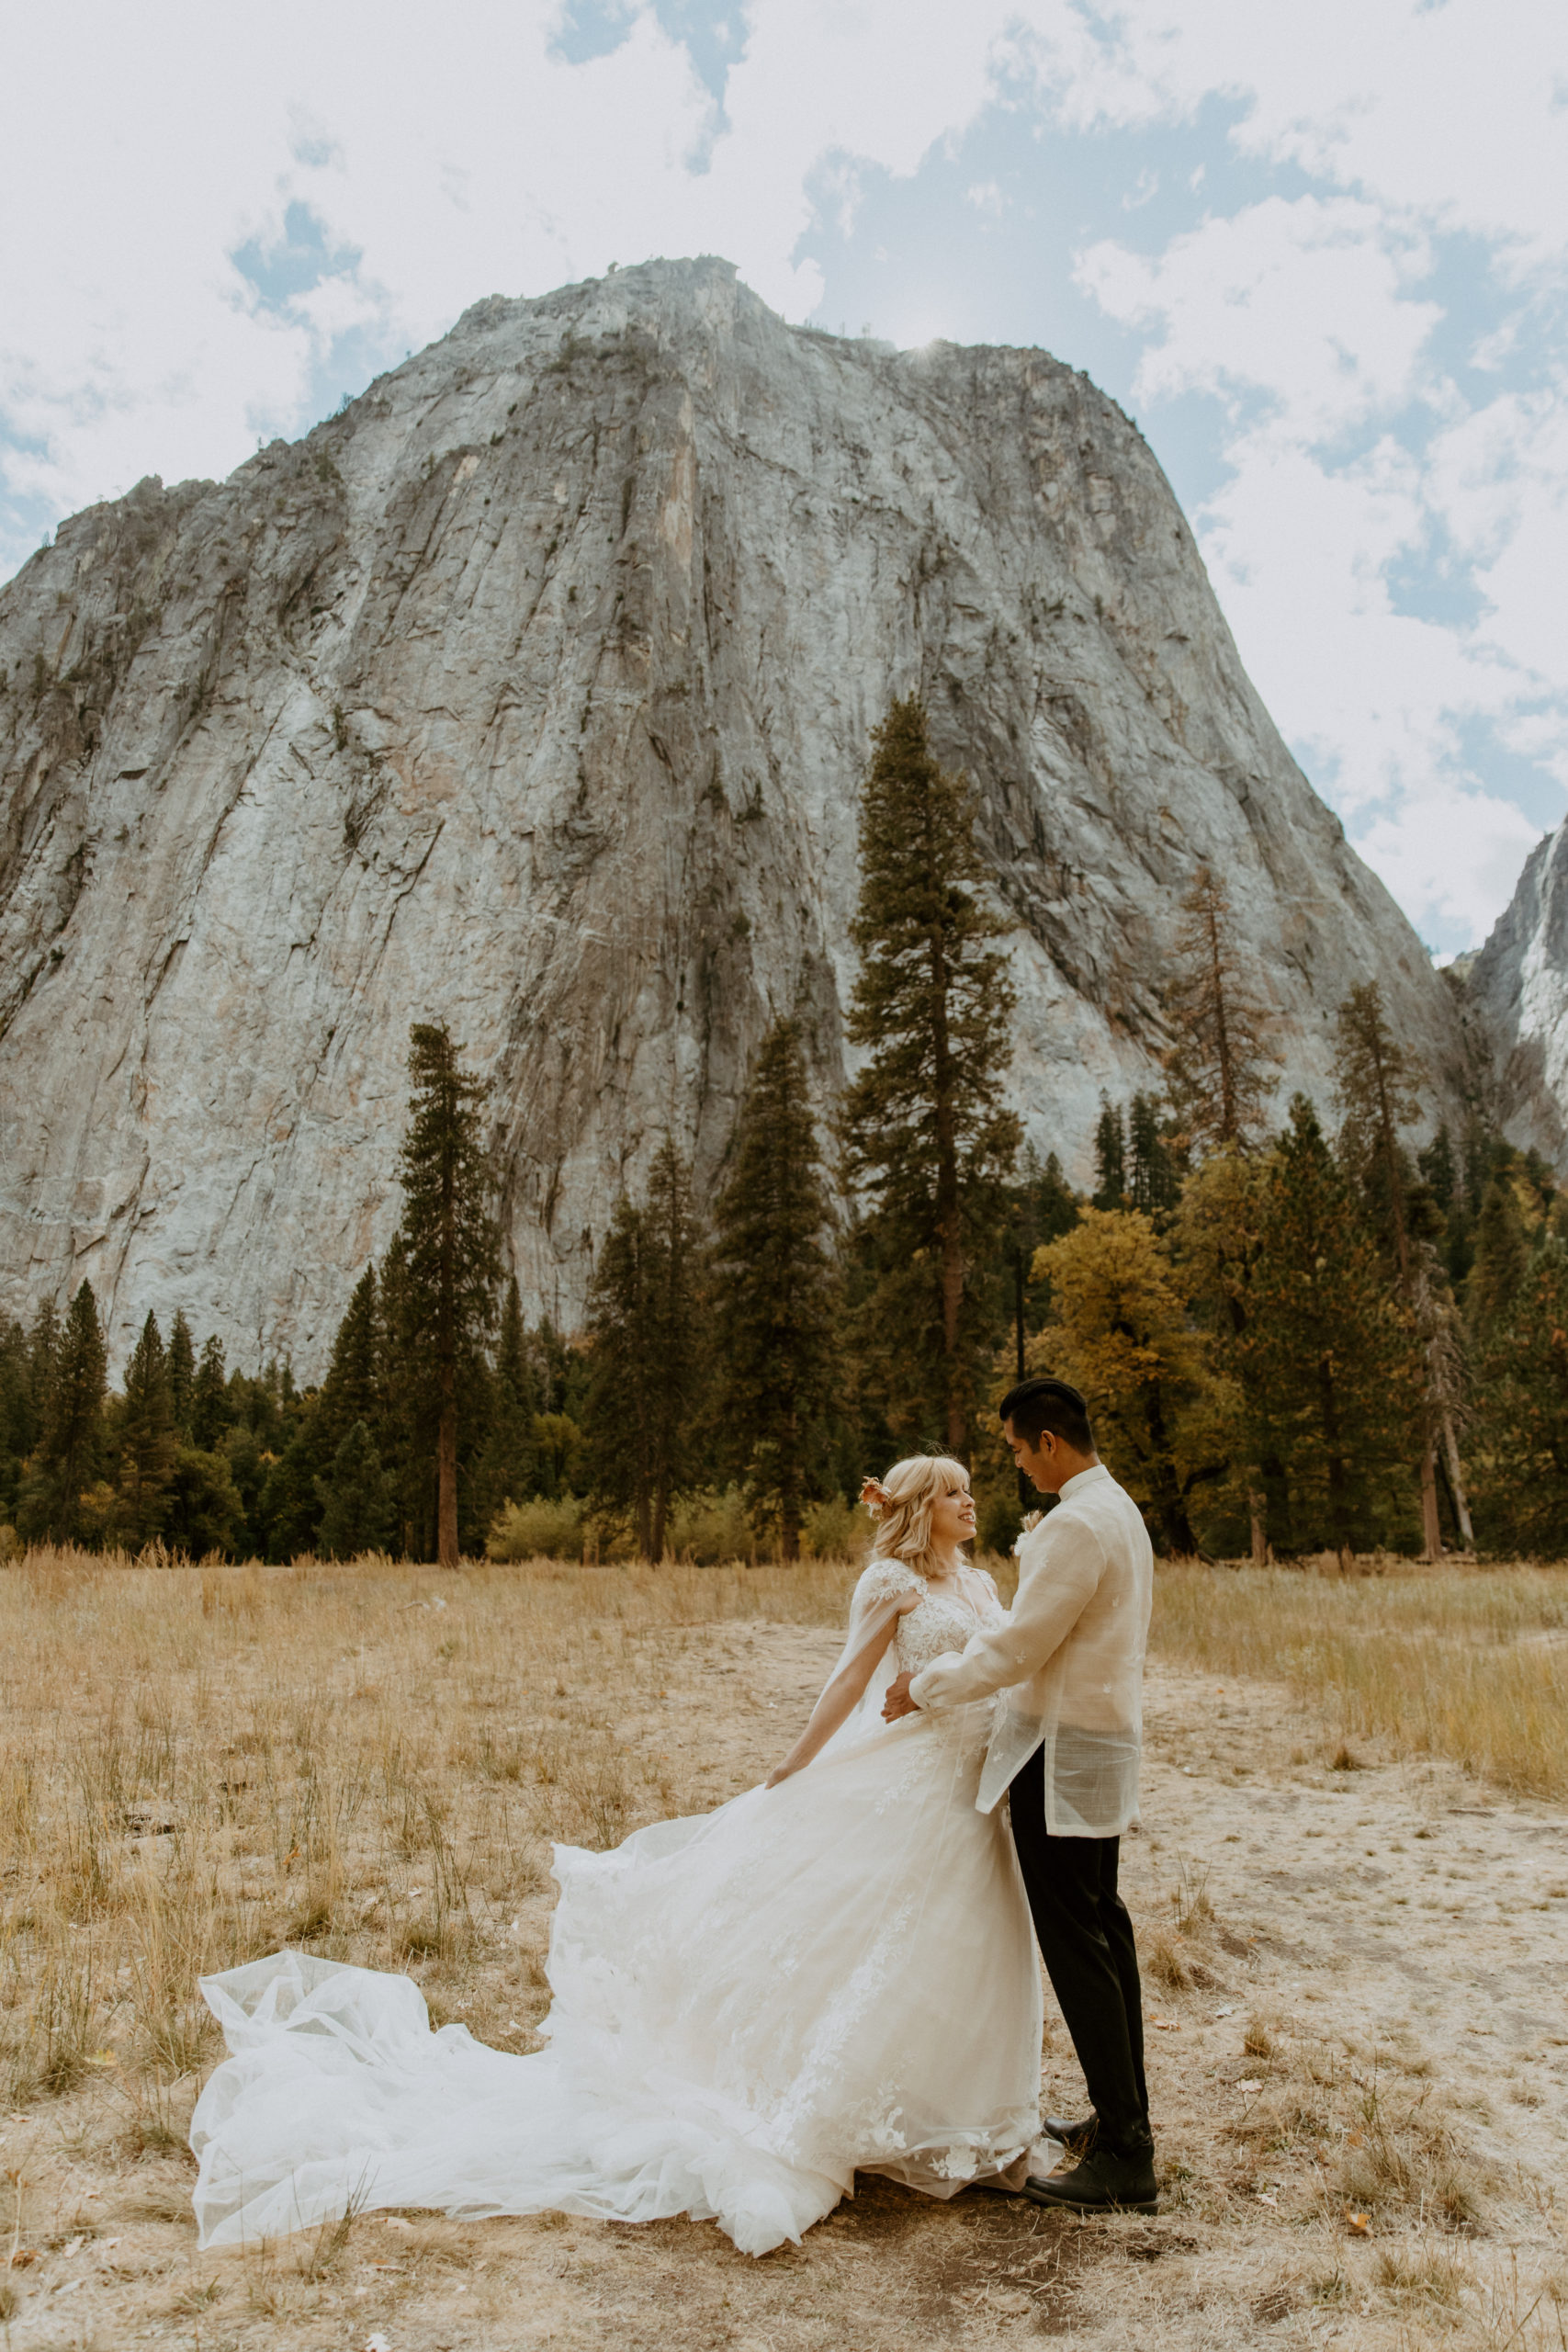 the bride and groom enjoying their elopement in Yosemite